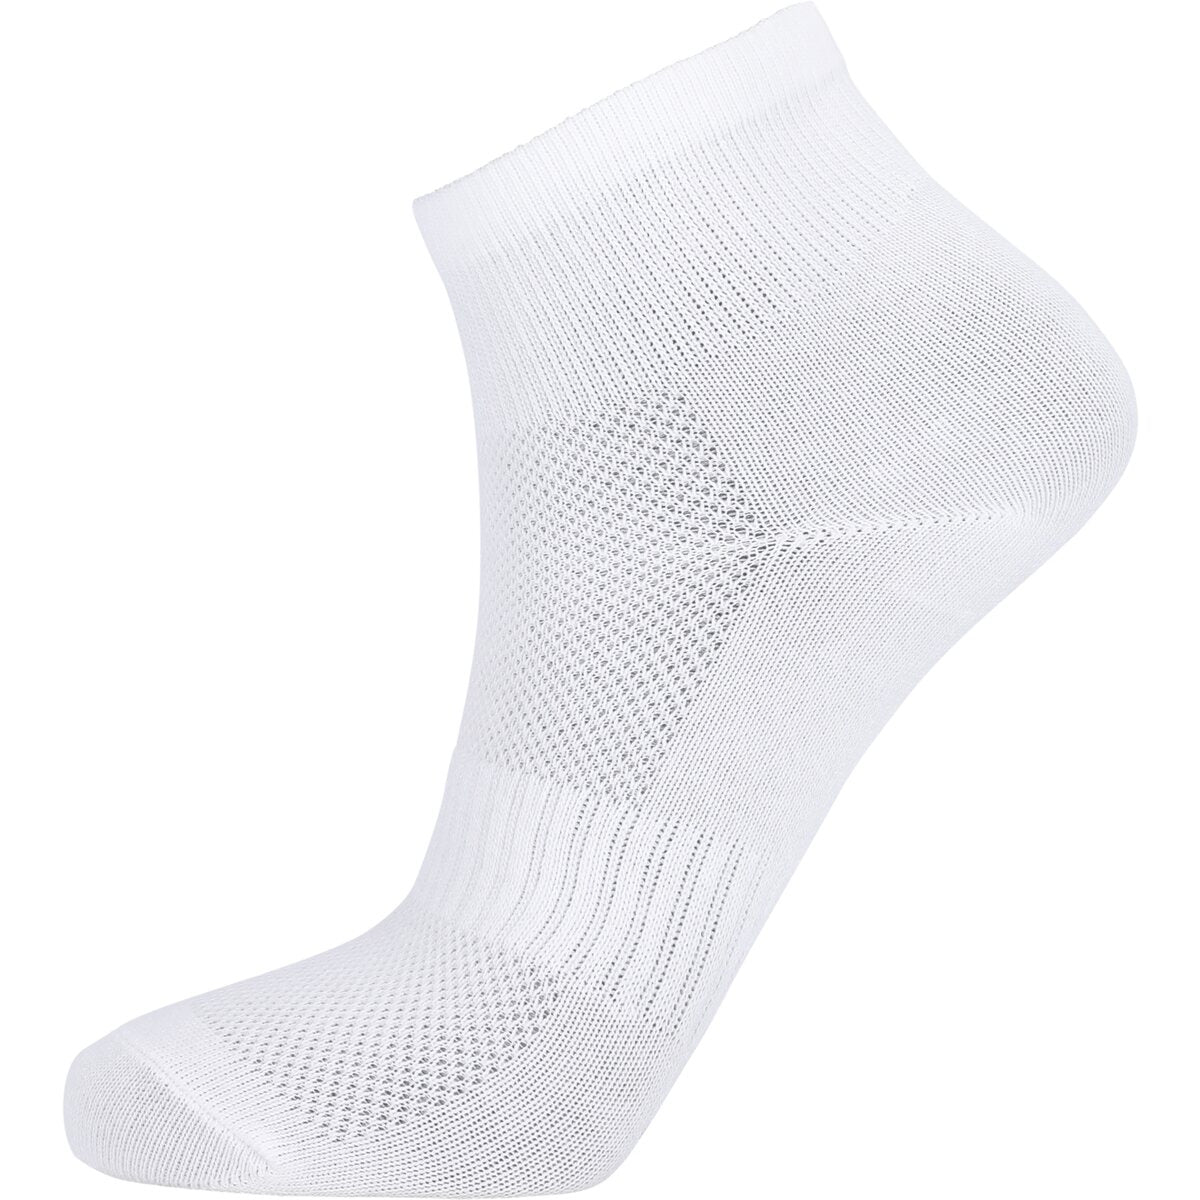 Athlecia Comfort-Mesh Sustainable Quarter Cut Sock 3-Pack - White 1 Shaws Department Stores